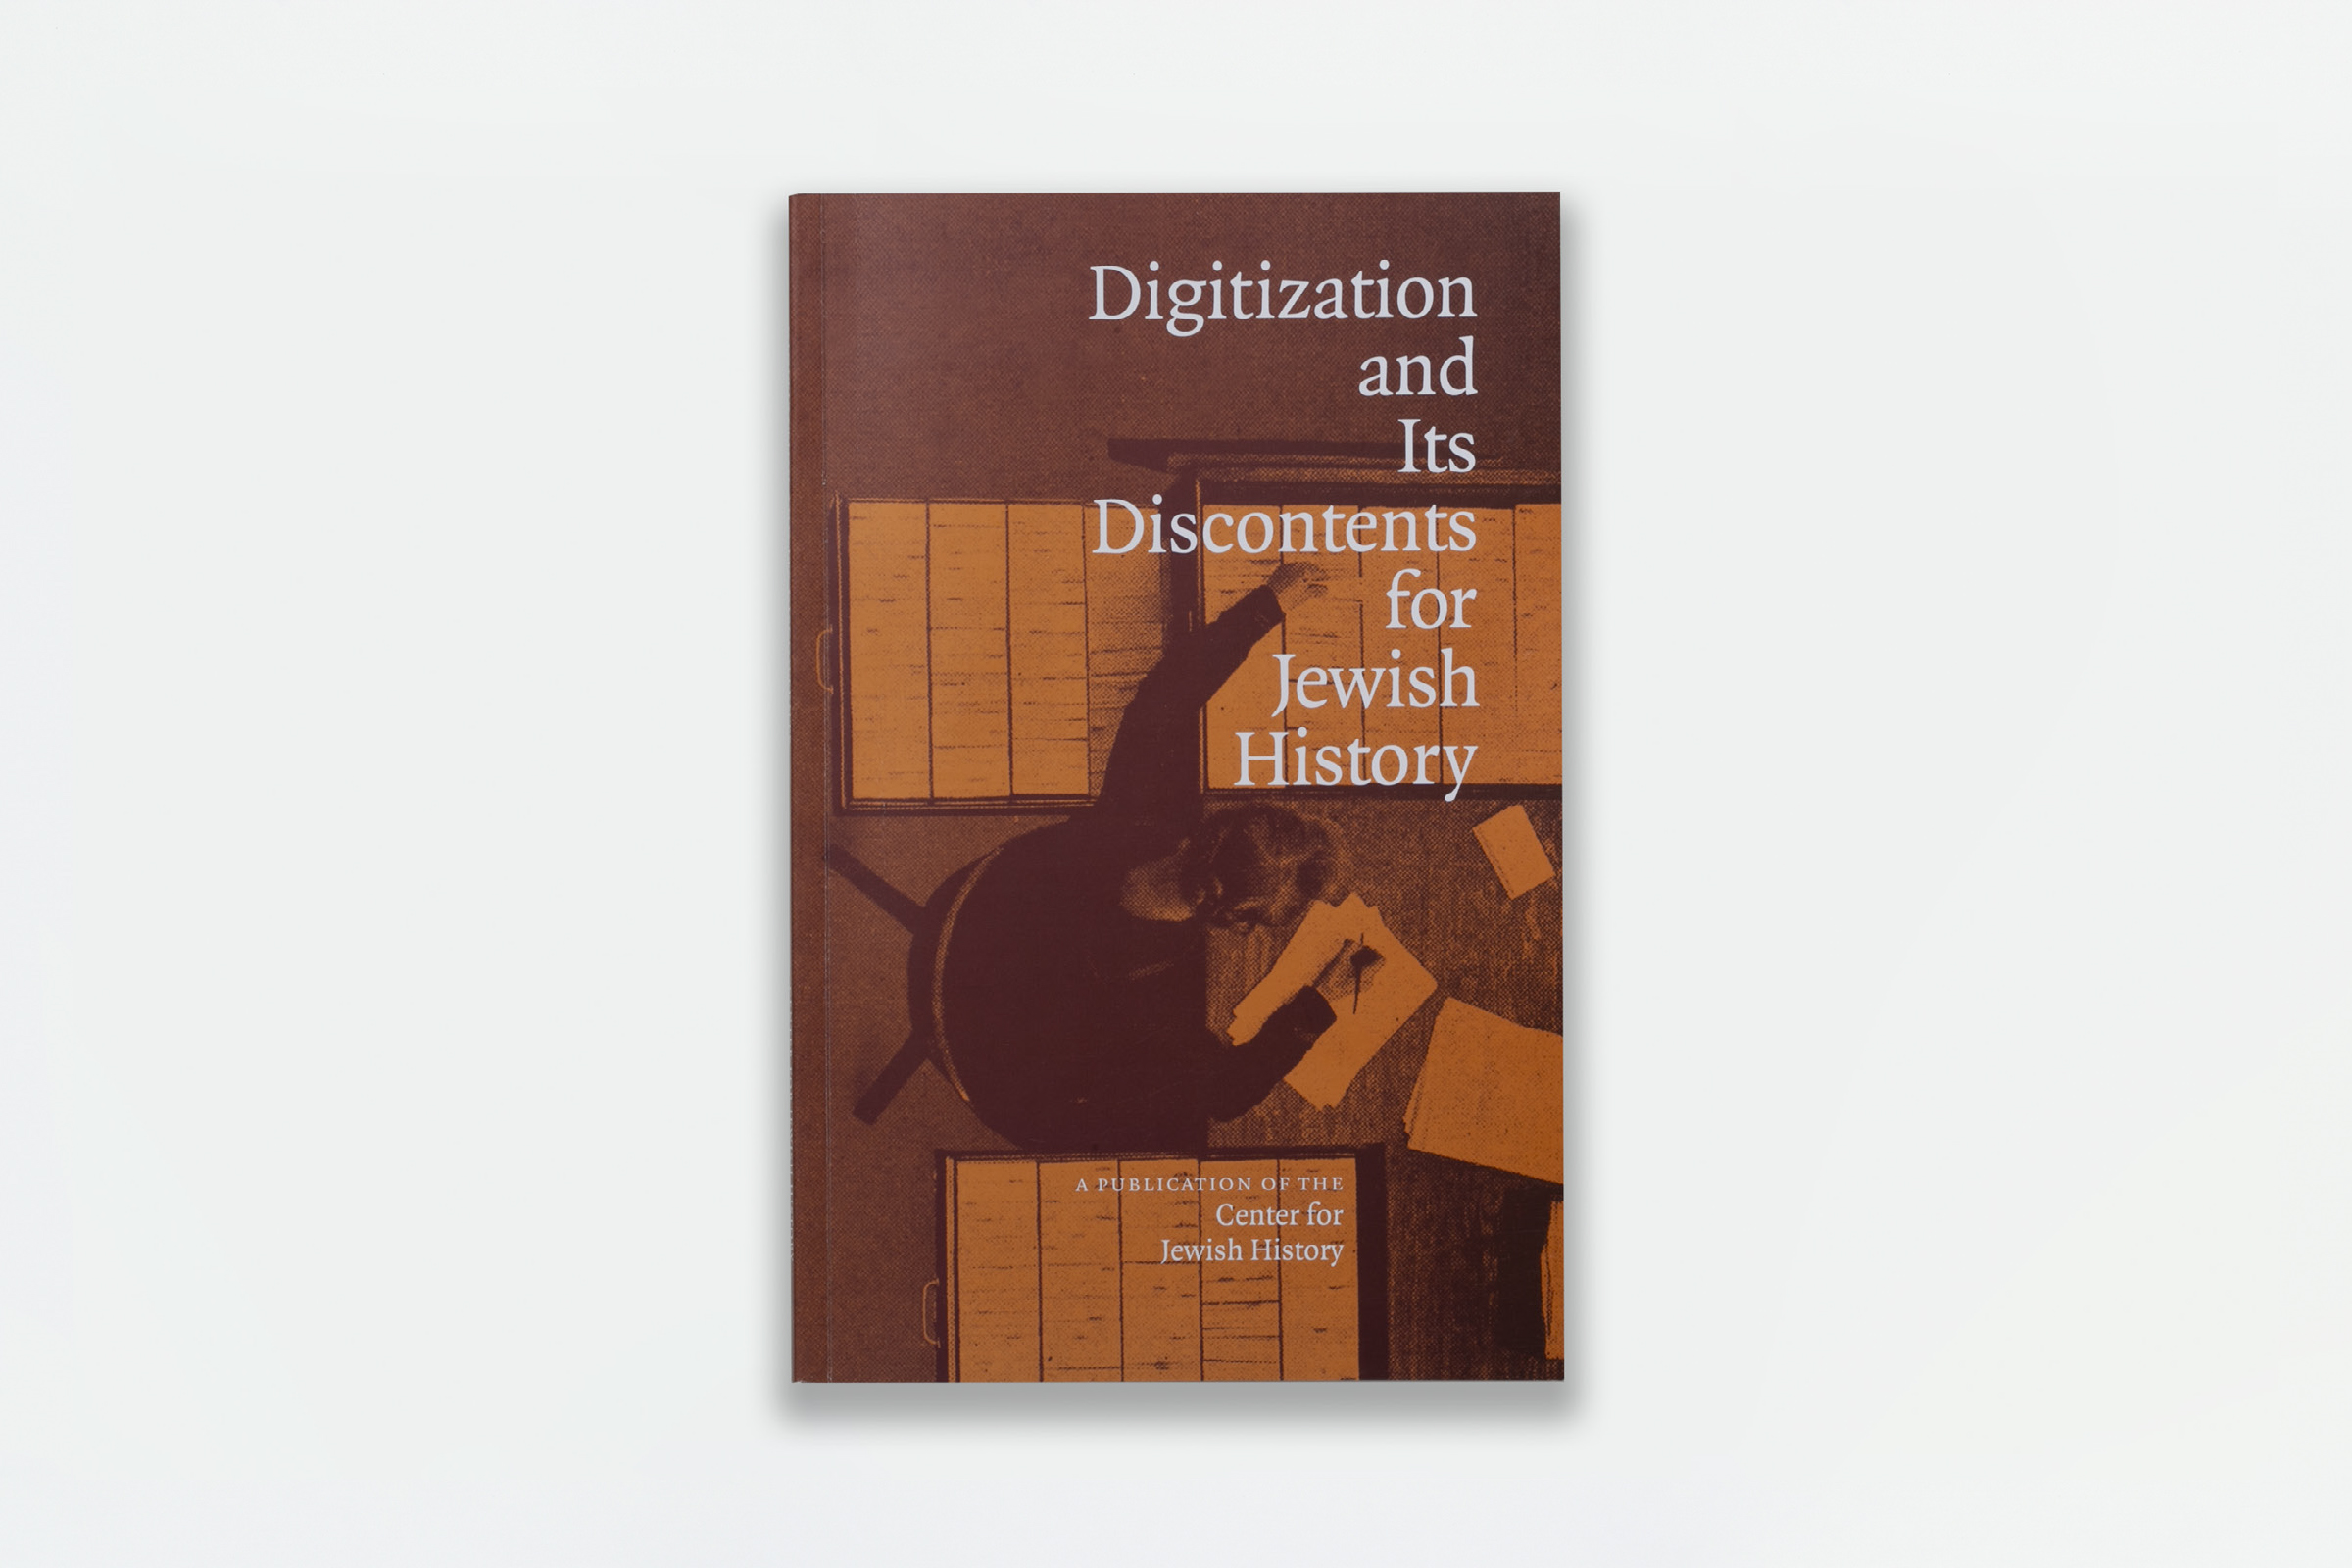 Digitization and Its Discontents for Jewish History